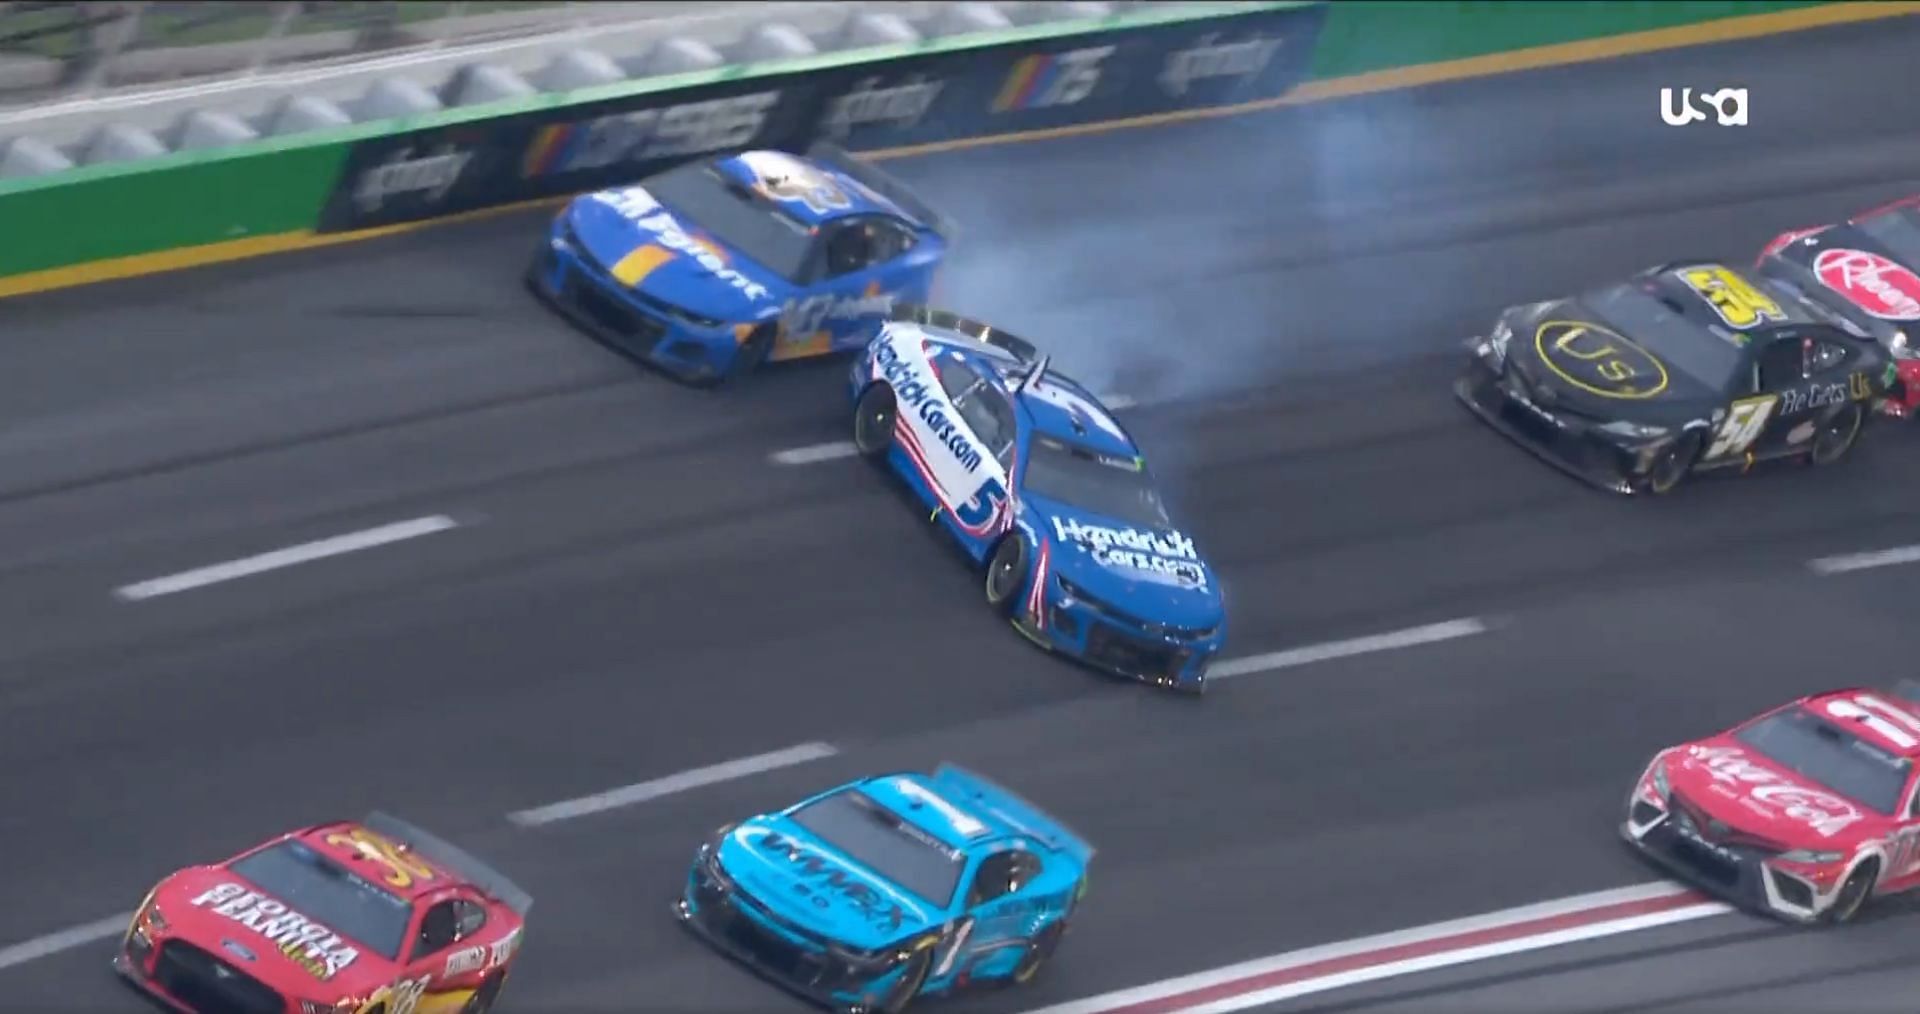 Kyle Larson getting spun around by Erik Jones in the Quaker State 400 (screengrab from NBC broadcast)